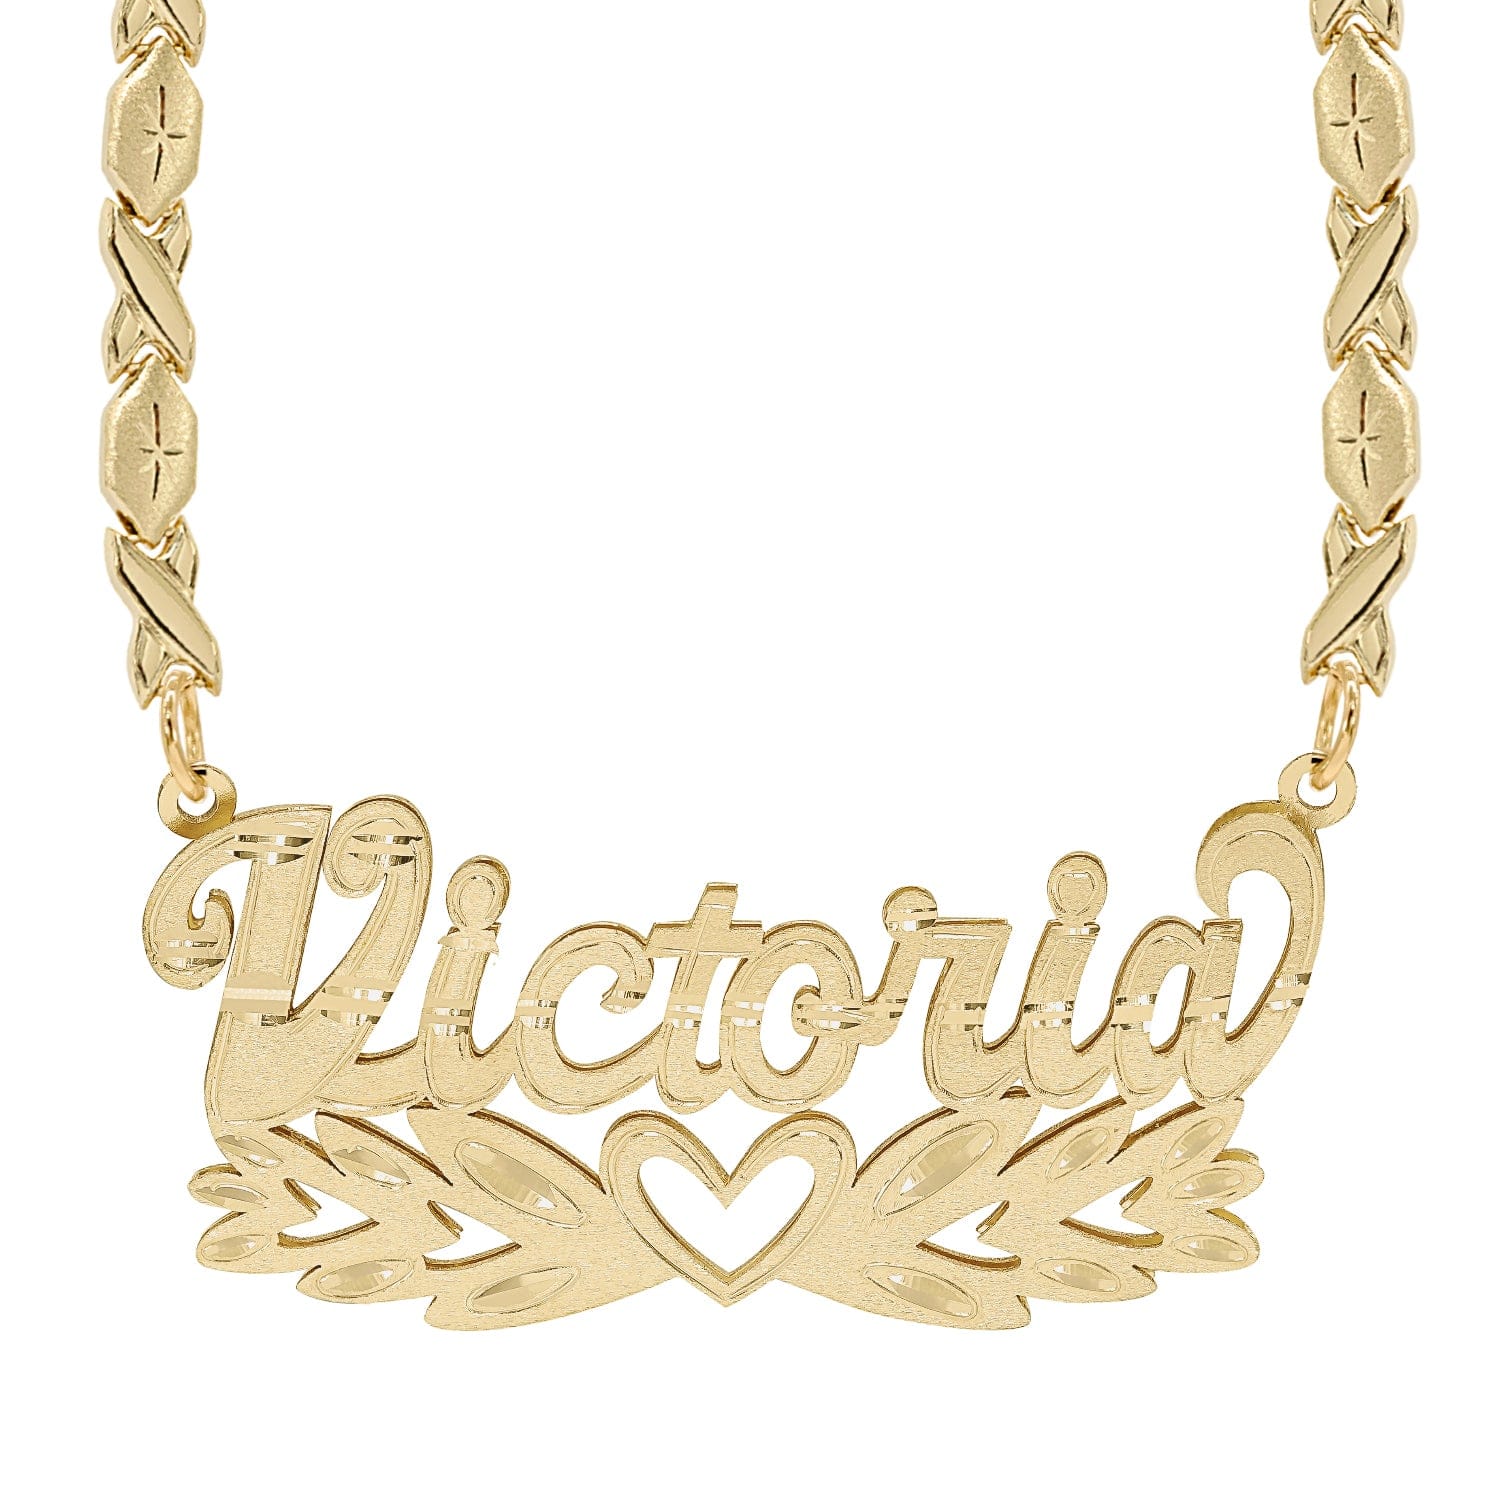 14K Gold over Sterling Silver / Xoxo Chain Double Nameplate Necklace "Victoria" with Xoxo Chain